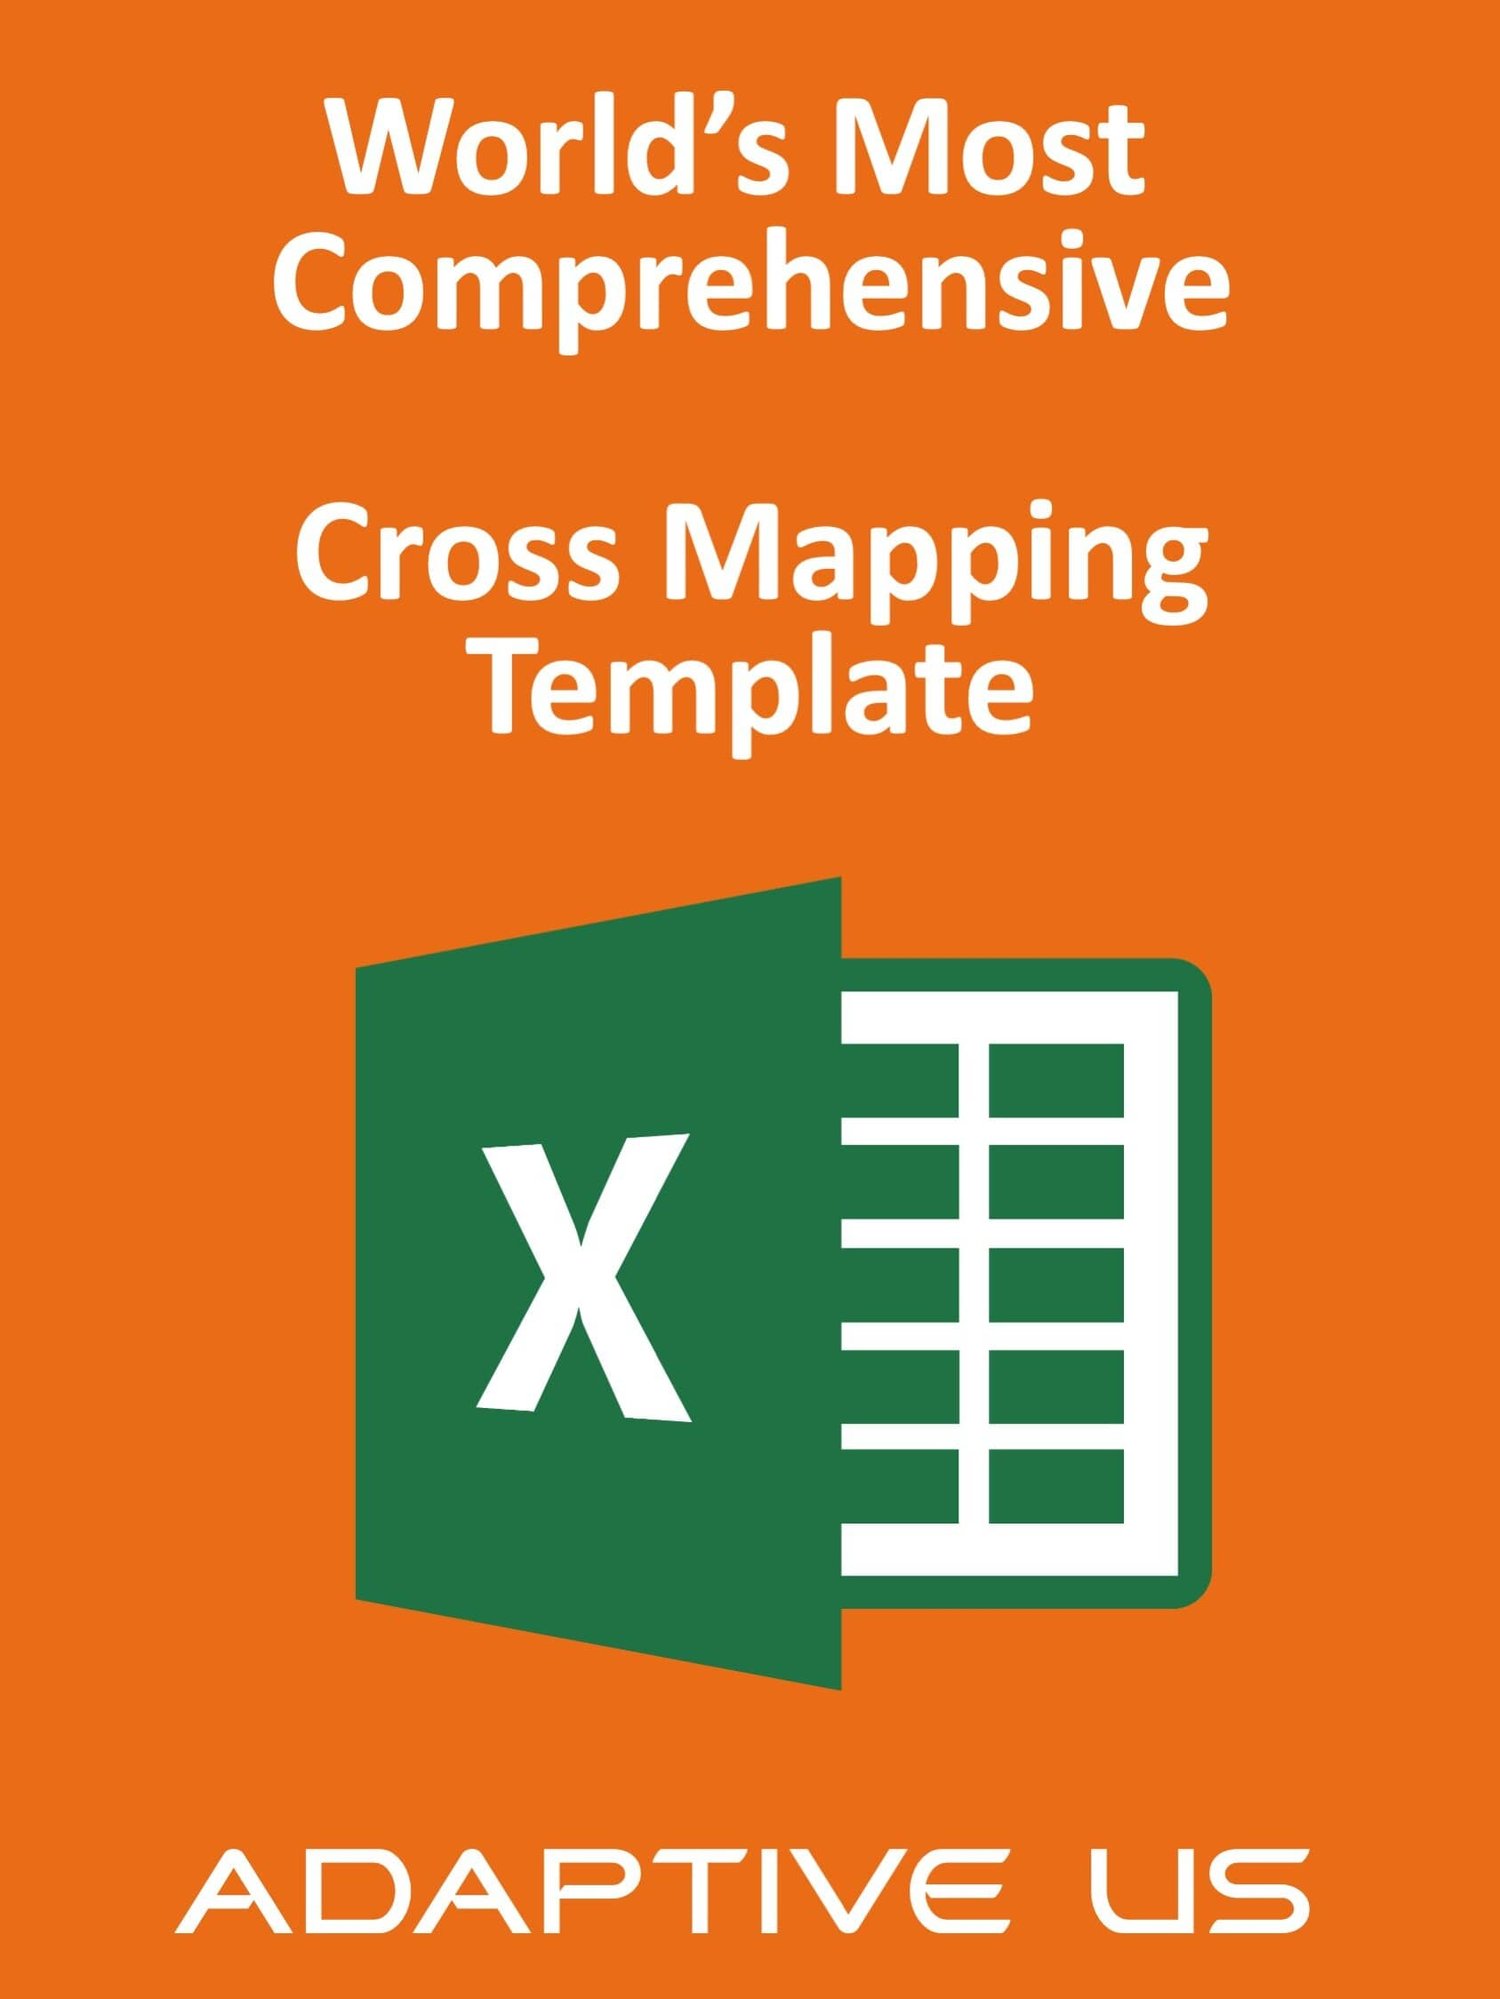 Cross Mapping Template